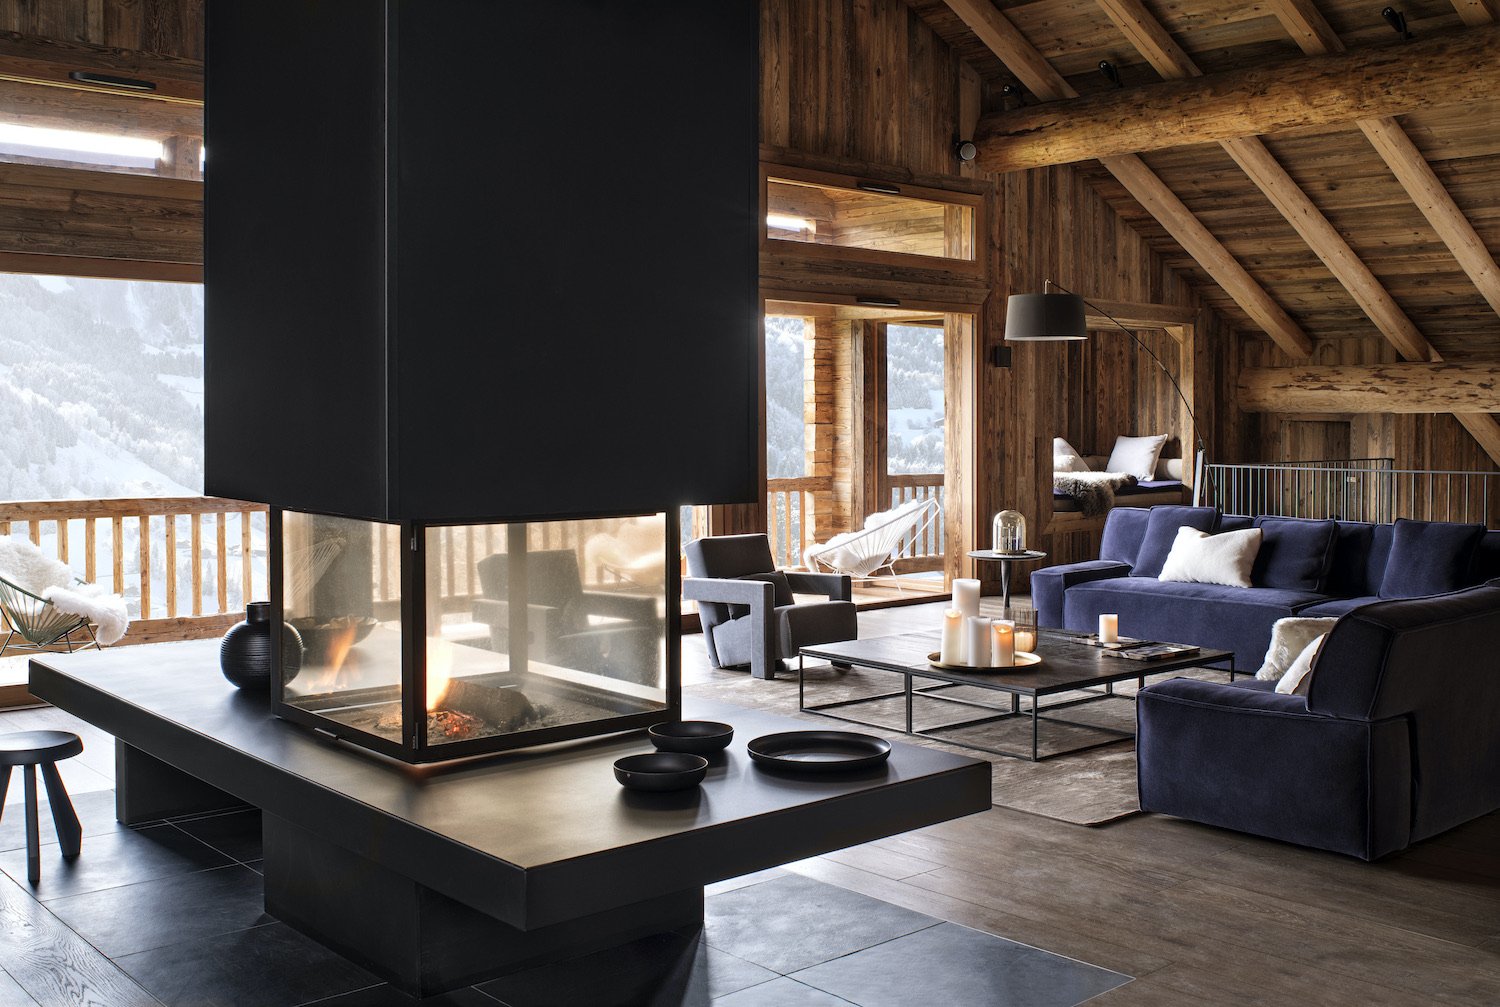 Luxury chalet in La Clusaz for your seminar in the Alps overlooking the Alps